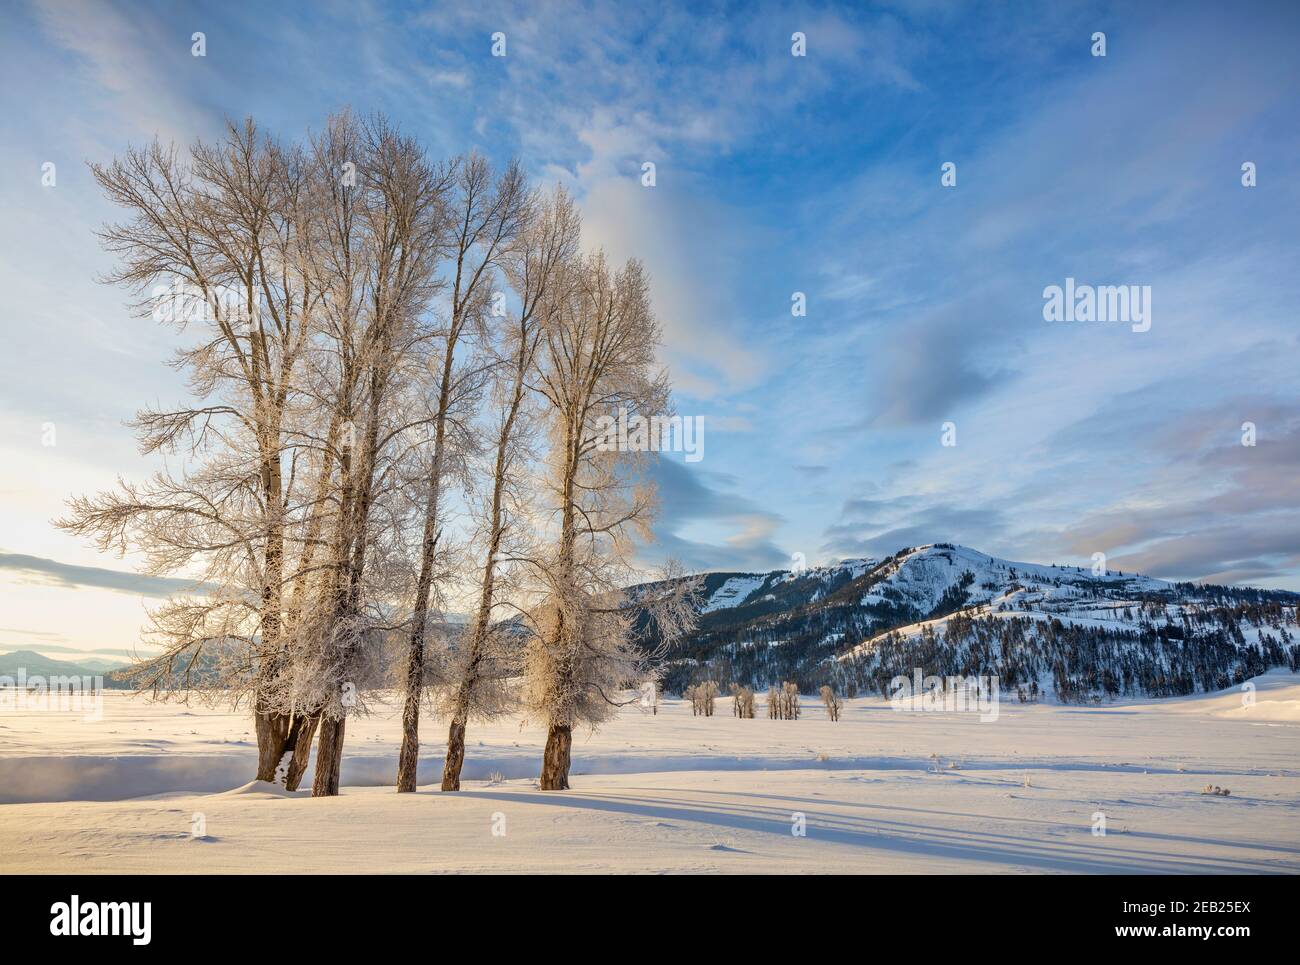 Yellowstone National Park, Wyoming: Frosted cottonwoods along Rose Creek in morning in the Lamar Valley with Amythest Peak in the distance Stock Photo